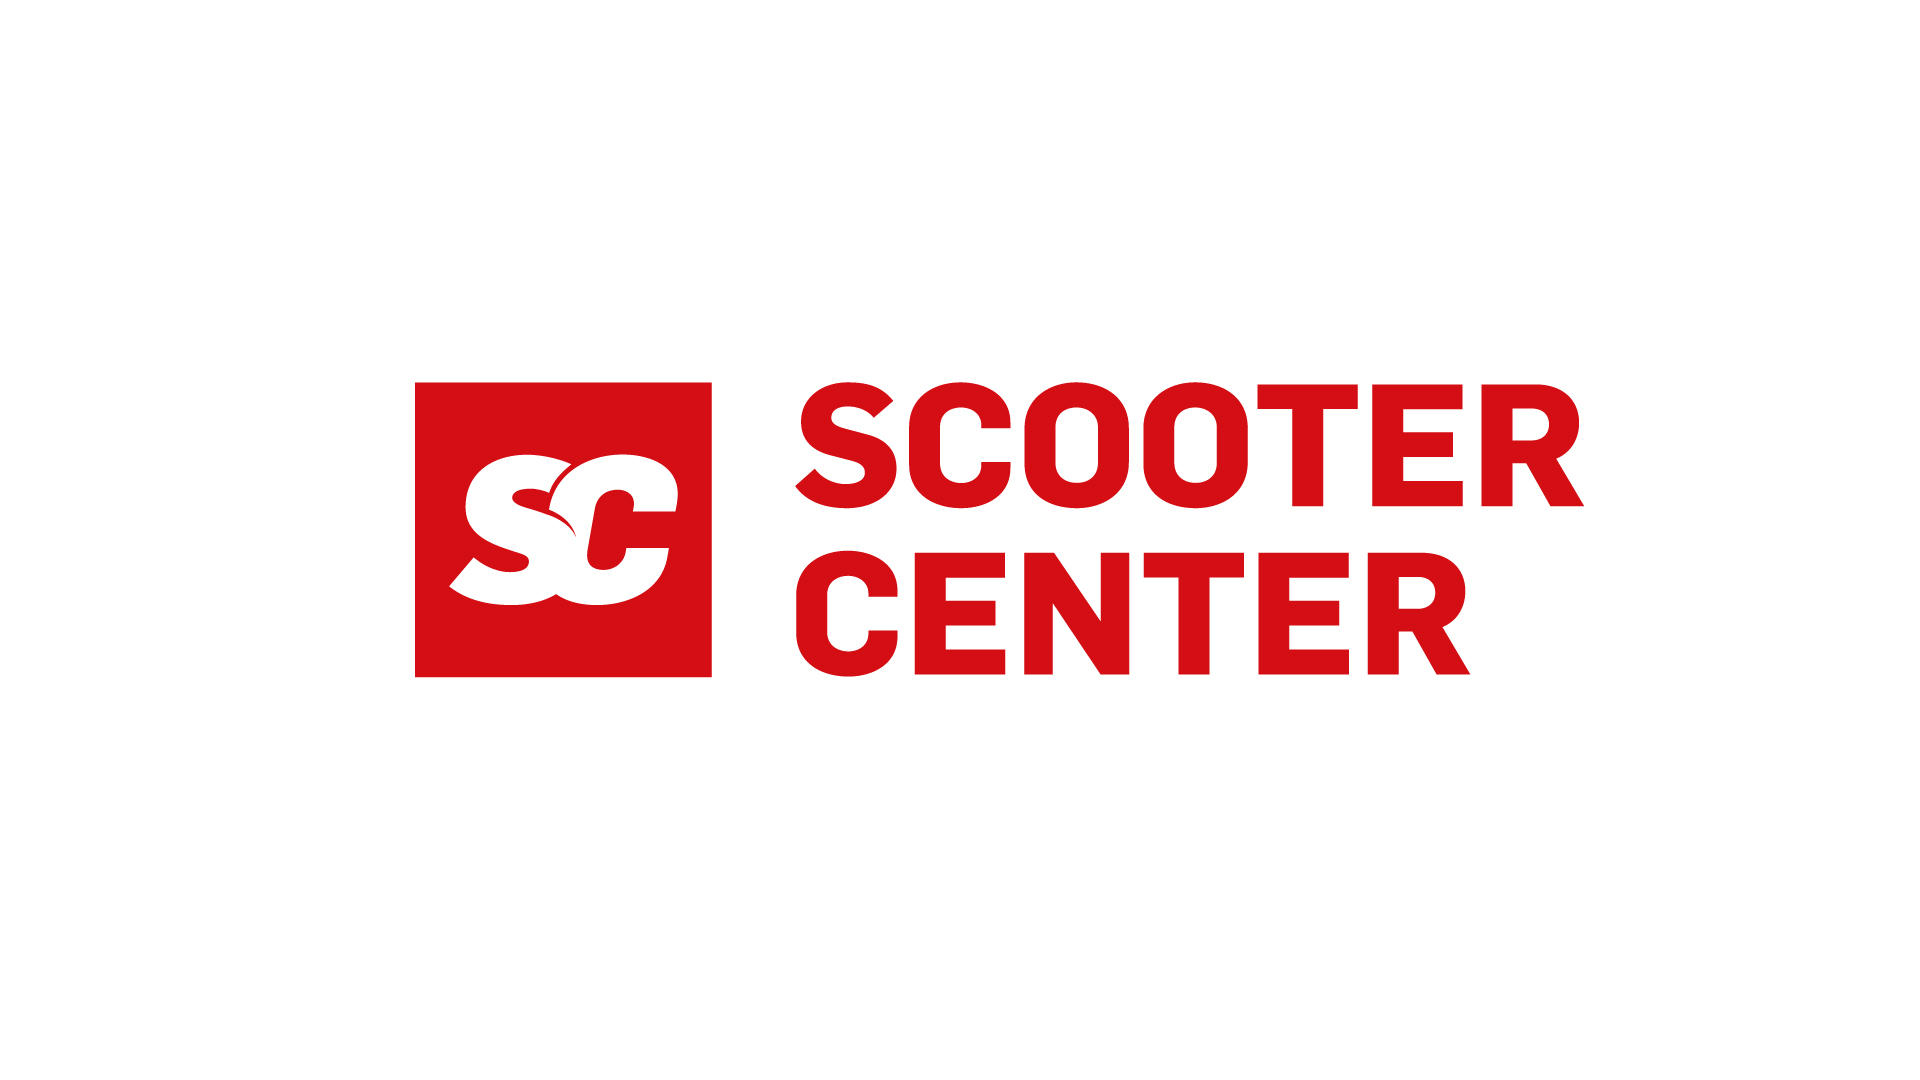 SC- SCOOTER CENTER